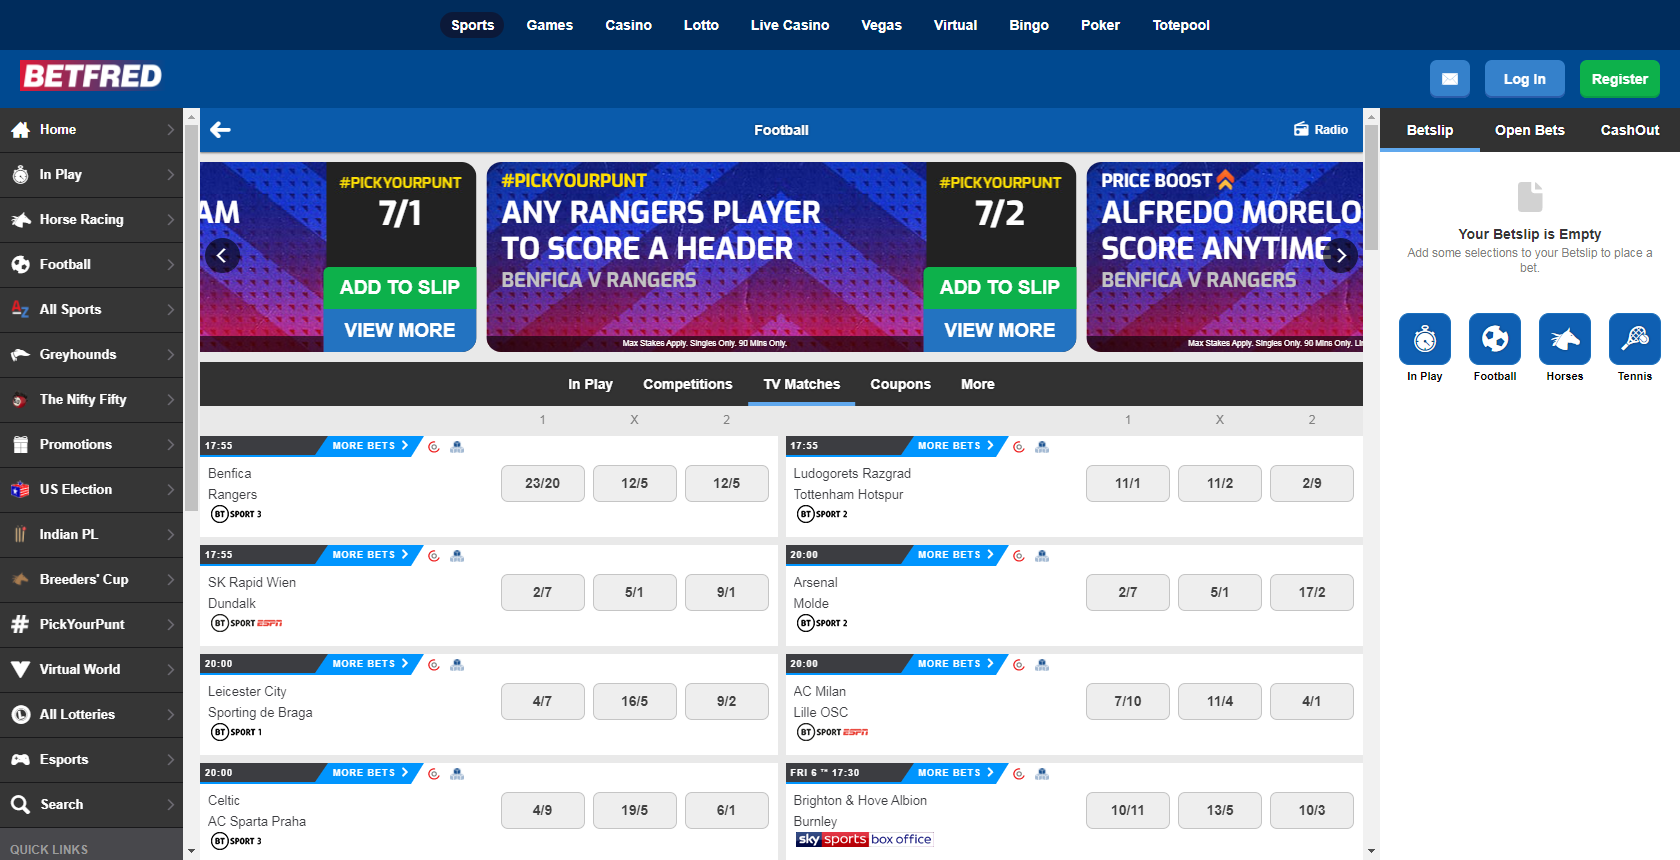 bookmaker betfred football betting offer